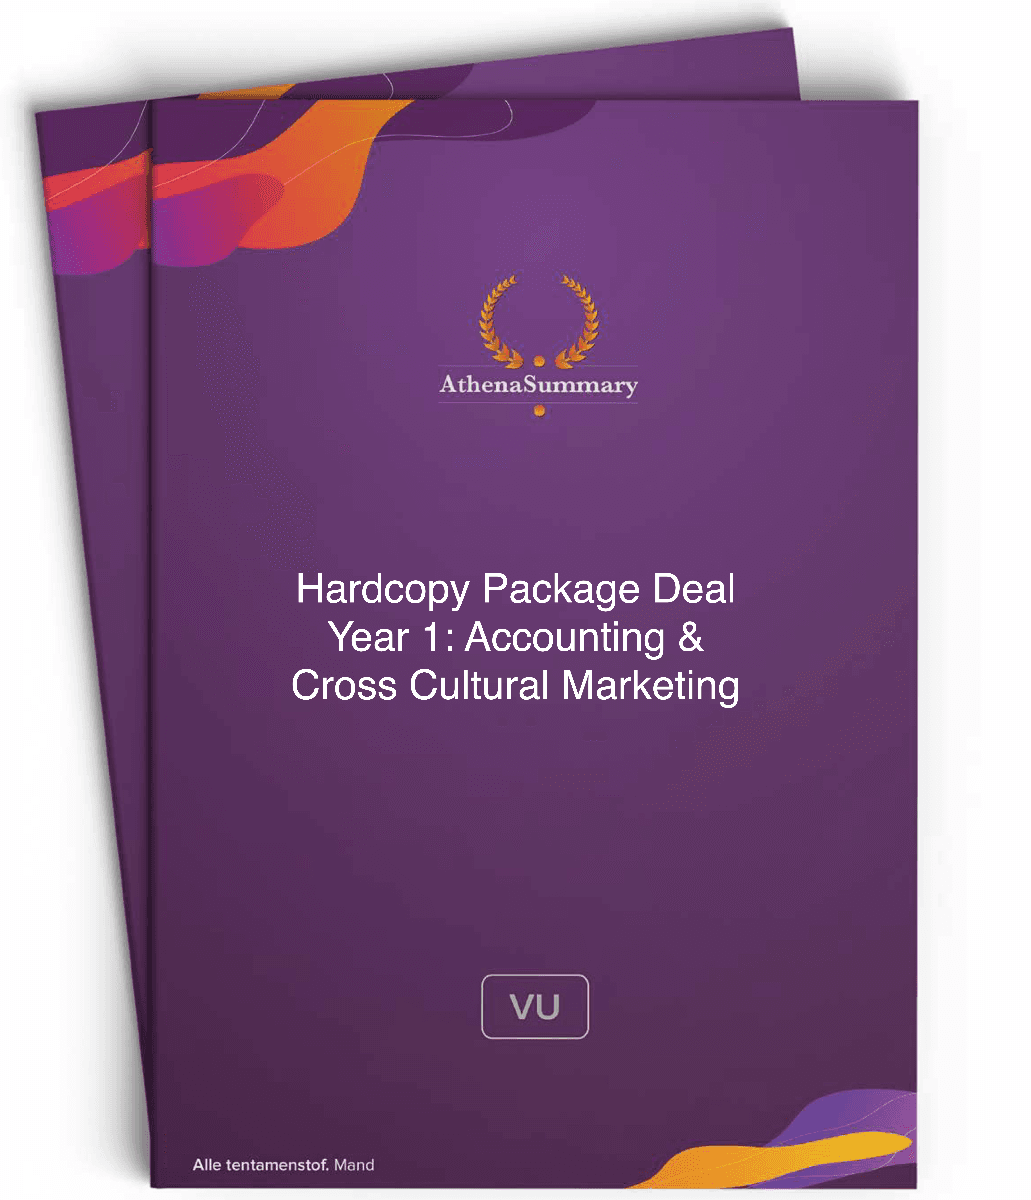 Hardcopy Package deal year 1: Accounting & Cross Cultural Marketing 